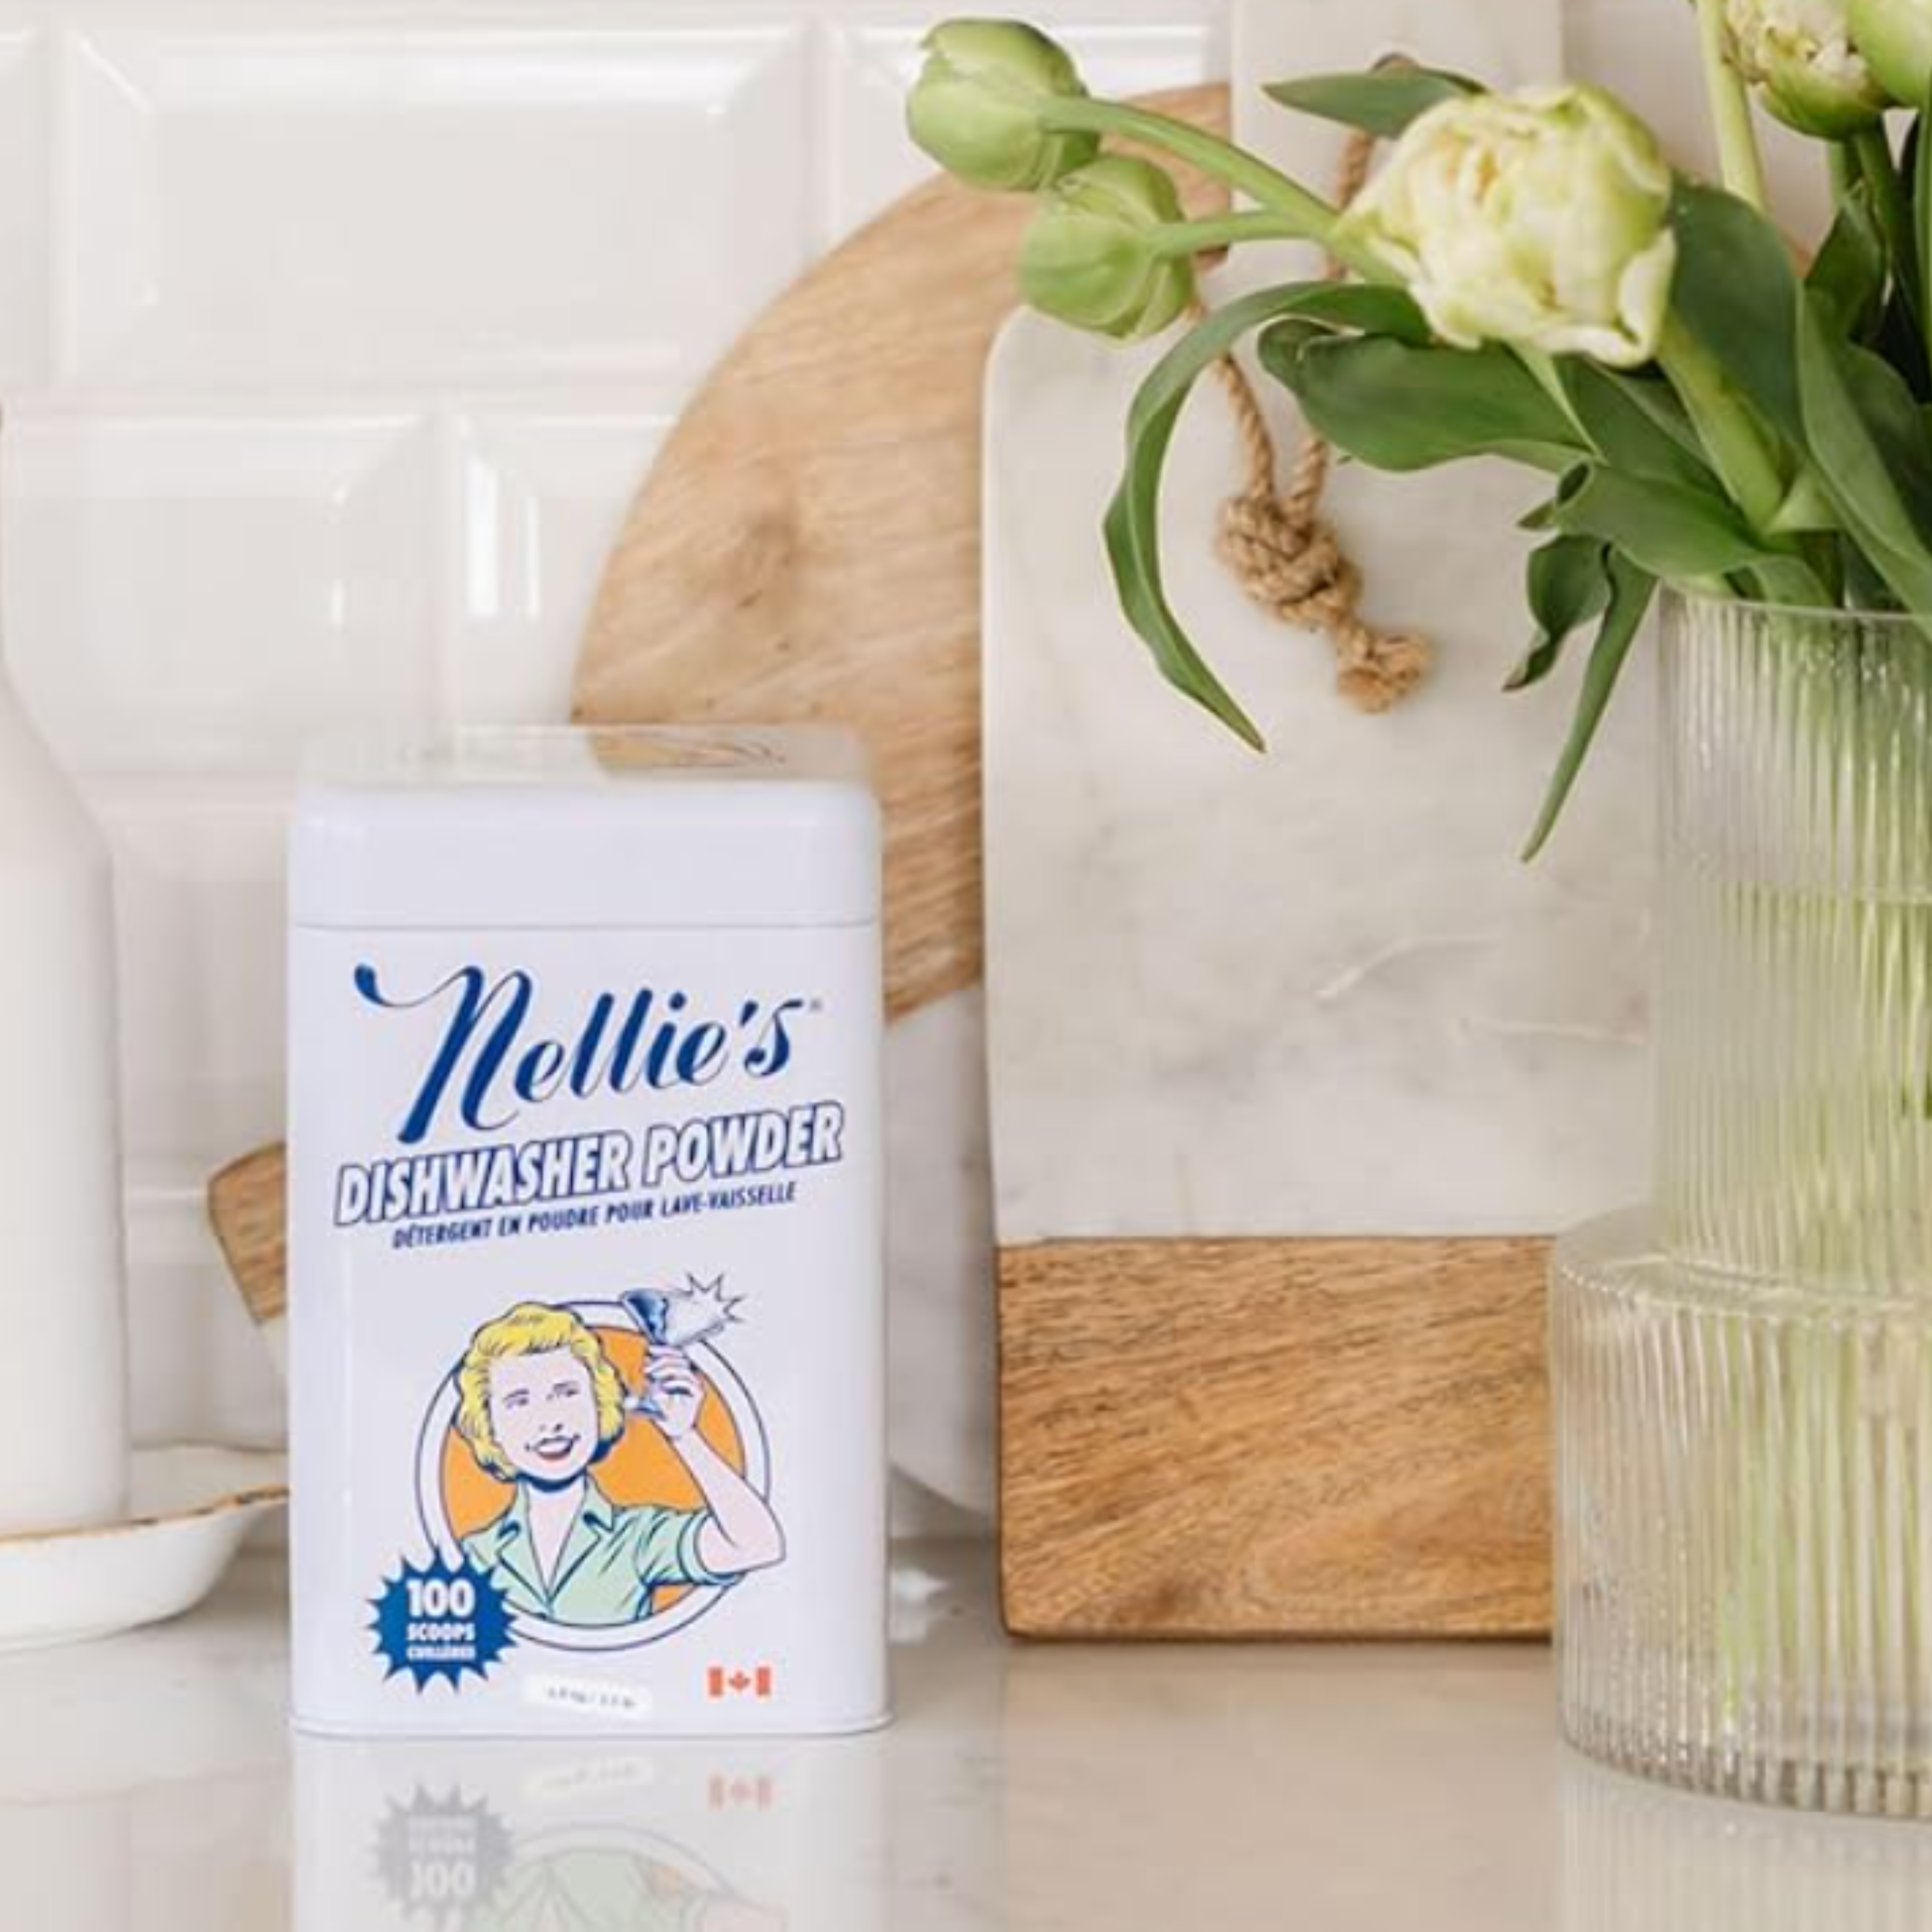 Nellie's: 8 Of The Best Zero Waste Dishwasher Detergent Options You Need to Try Now